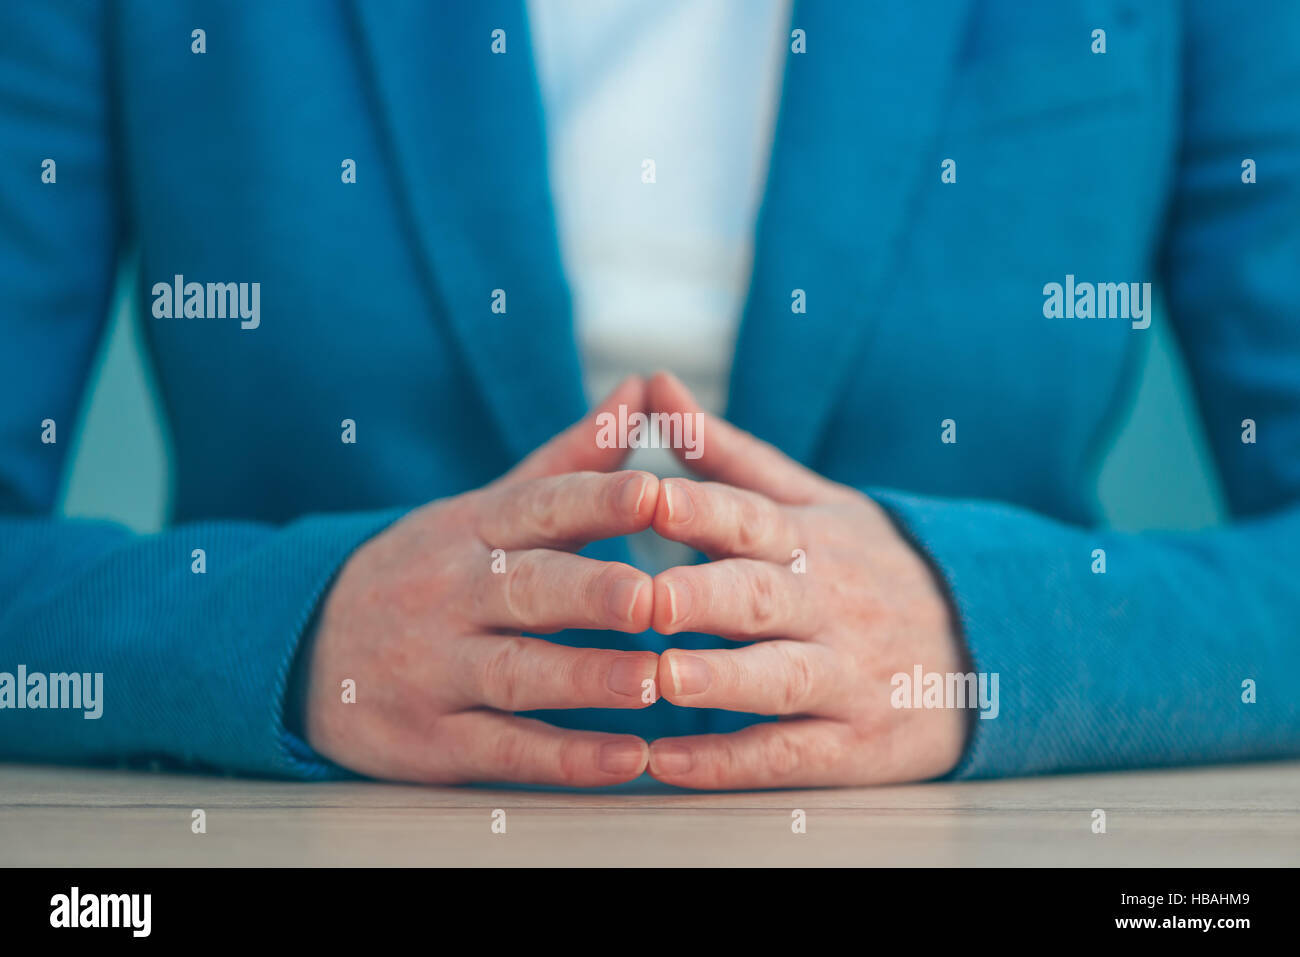 Steepled fingers of business woman as hand gesture sign of confidence, self-esteem, power and domination. Stock Photo